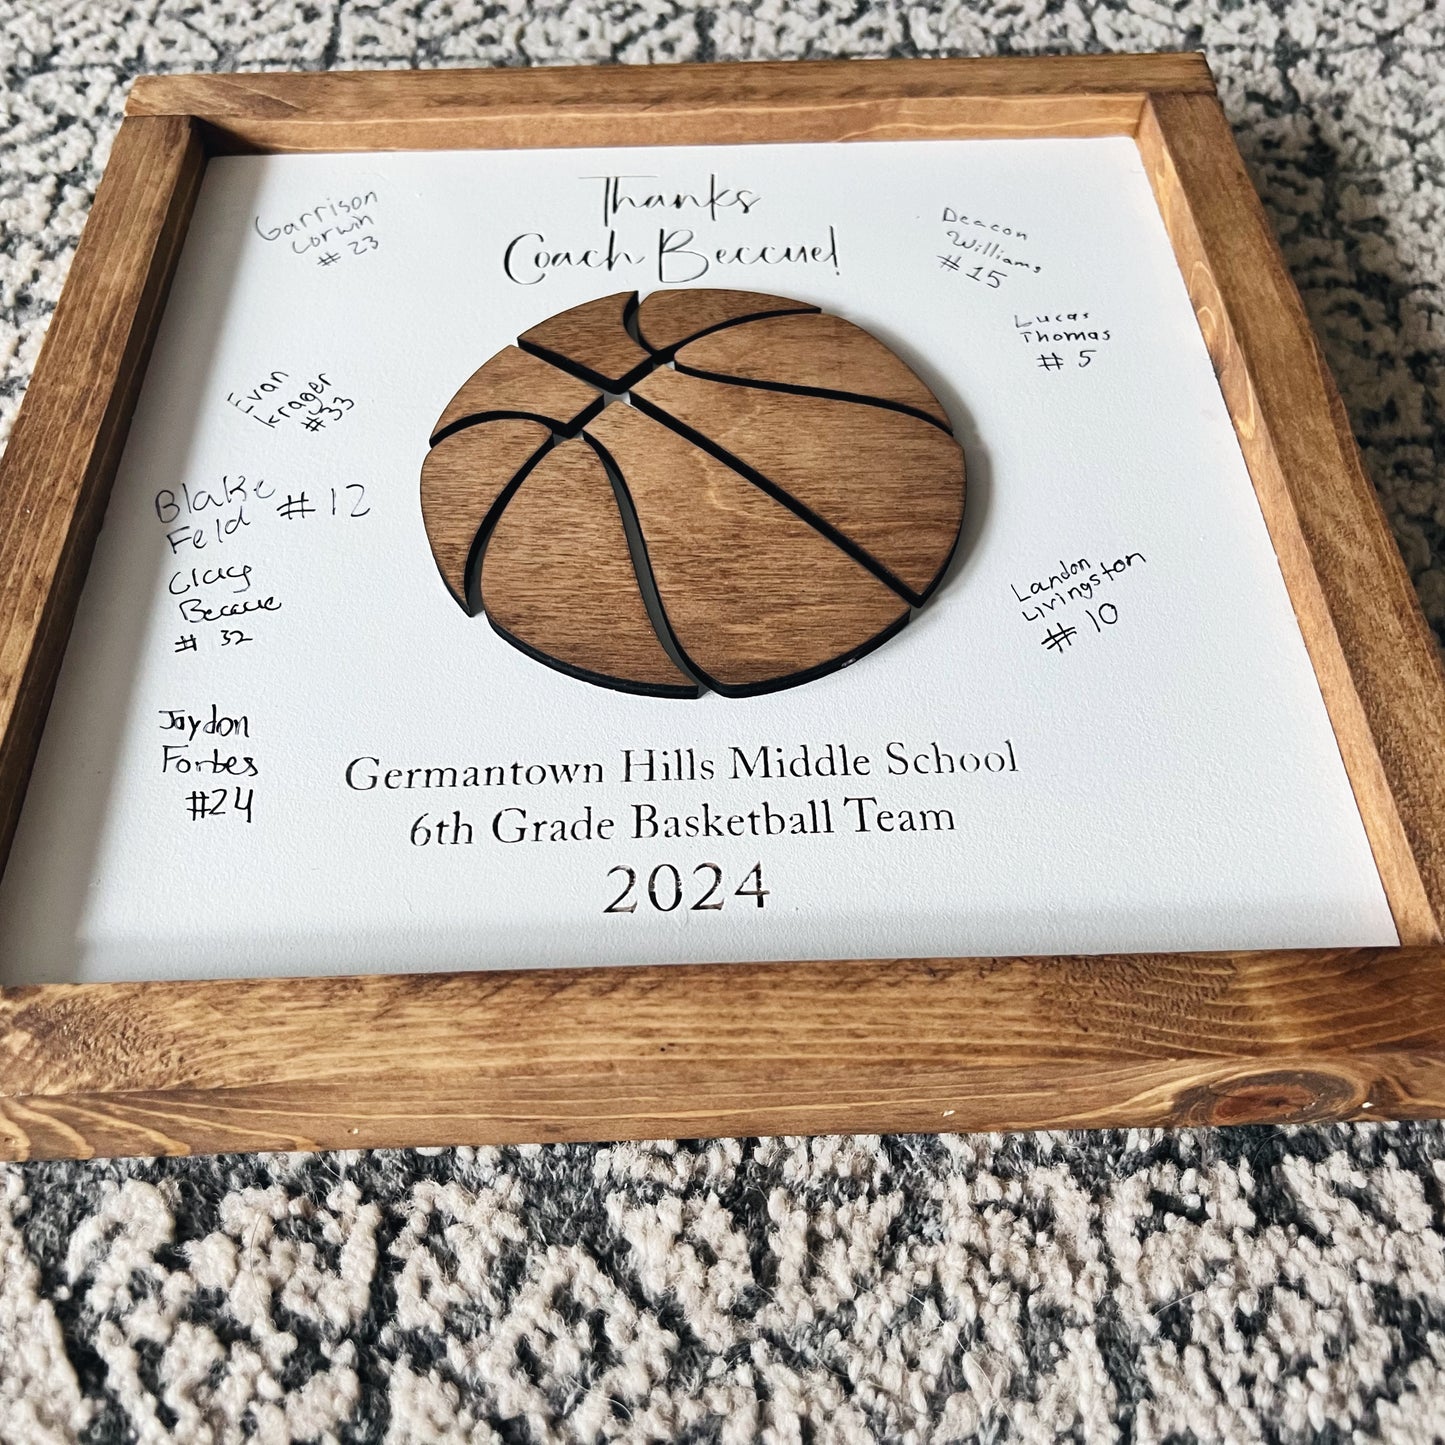 Personalized Basketball Coach Thank you Sign for Signatures